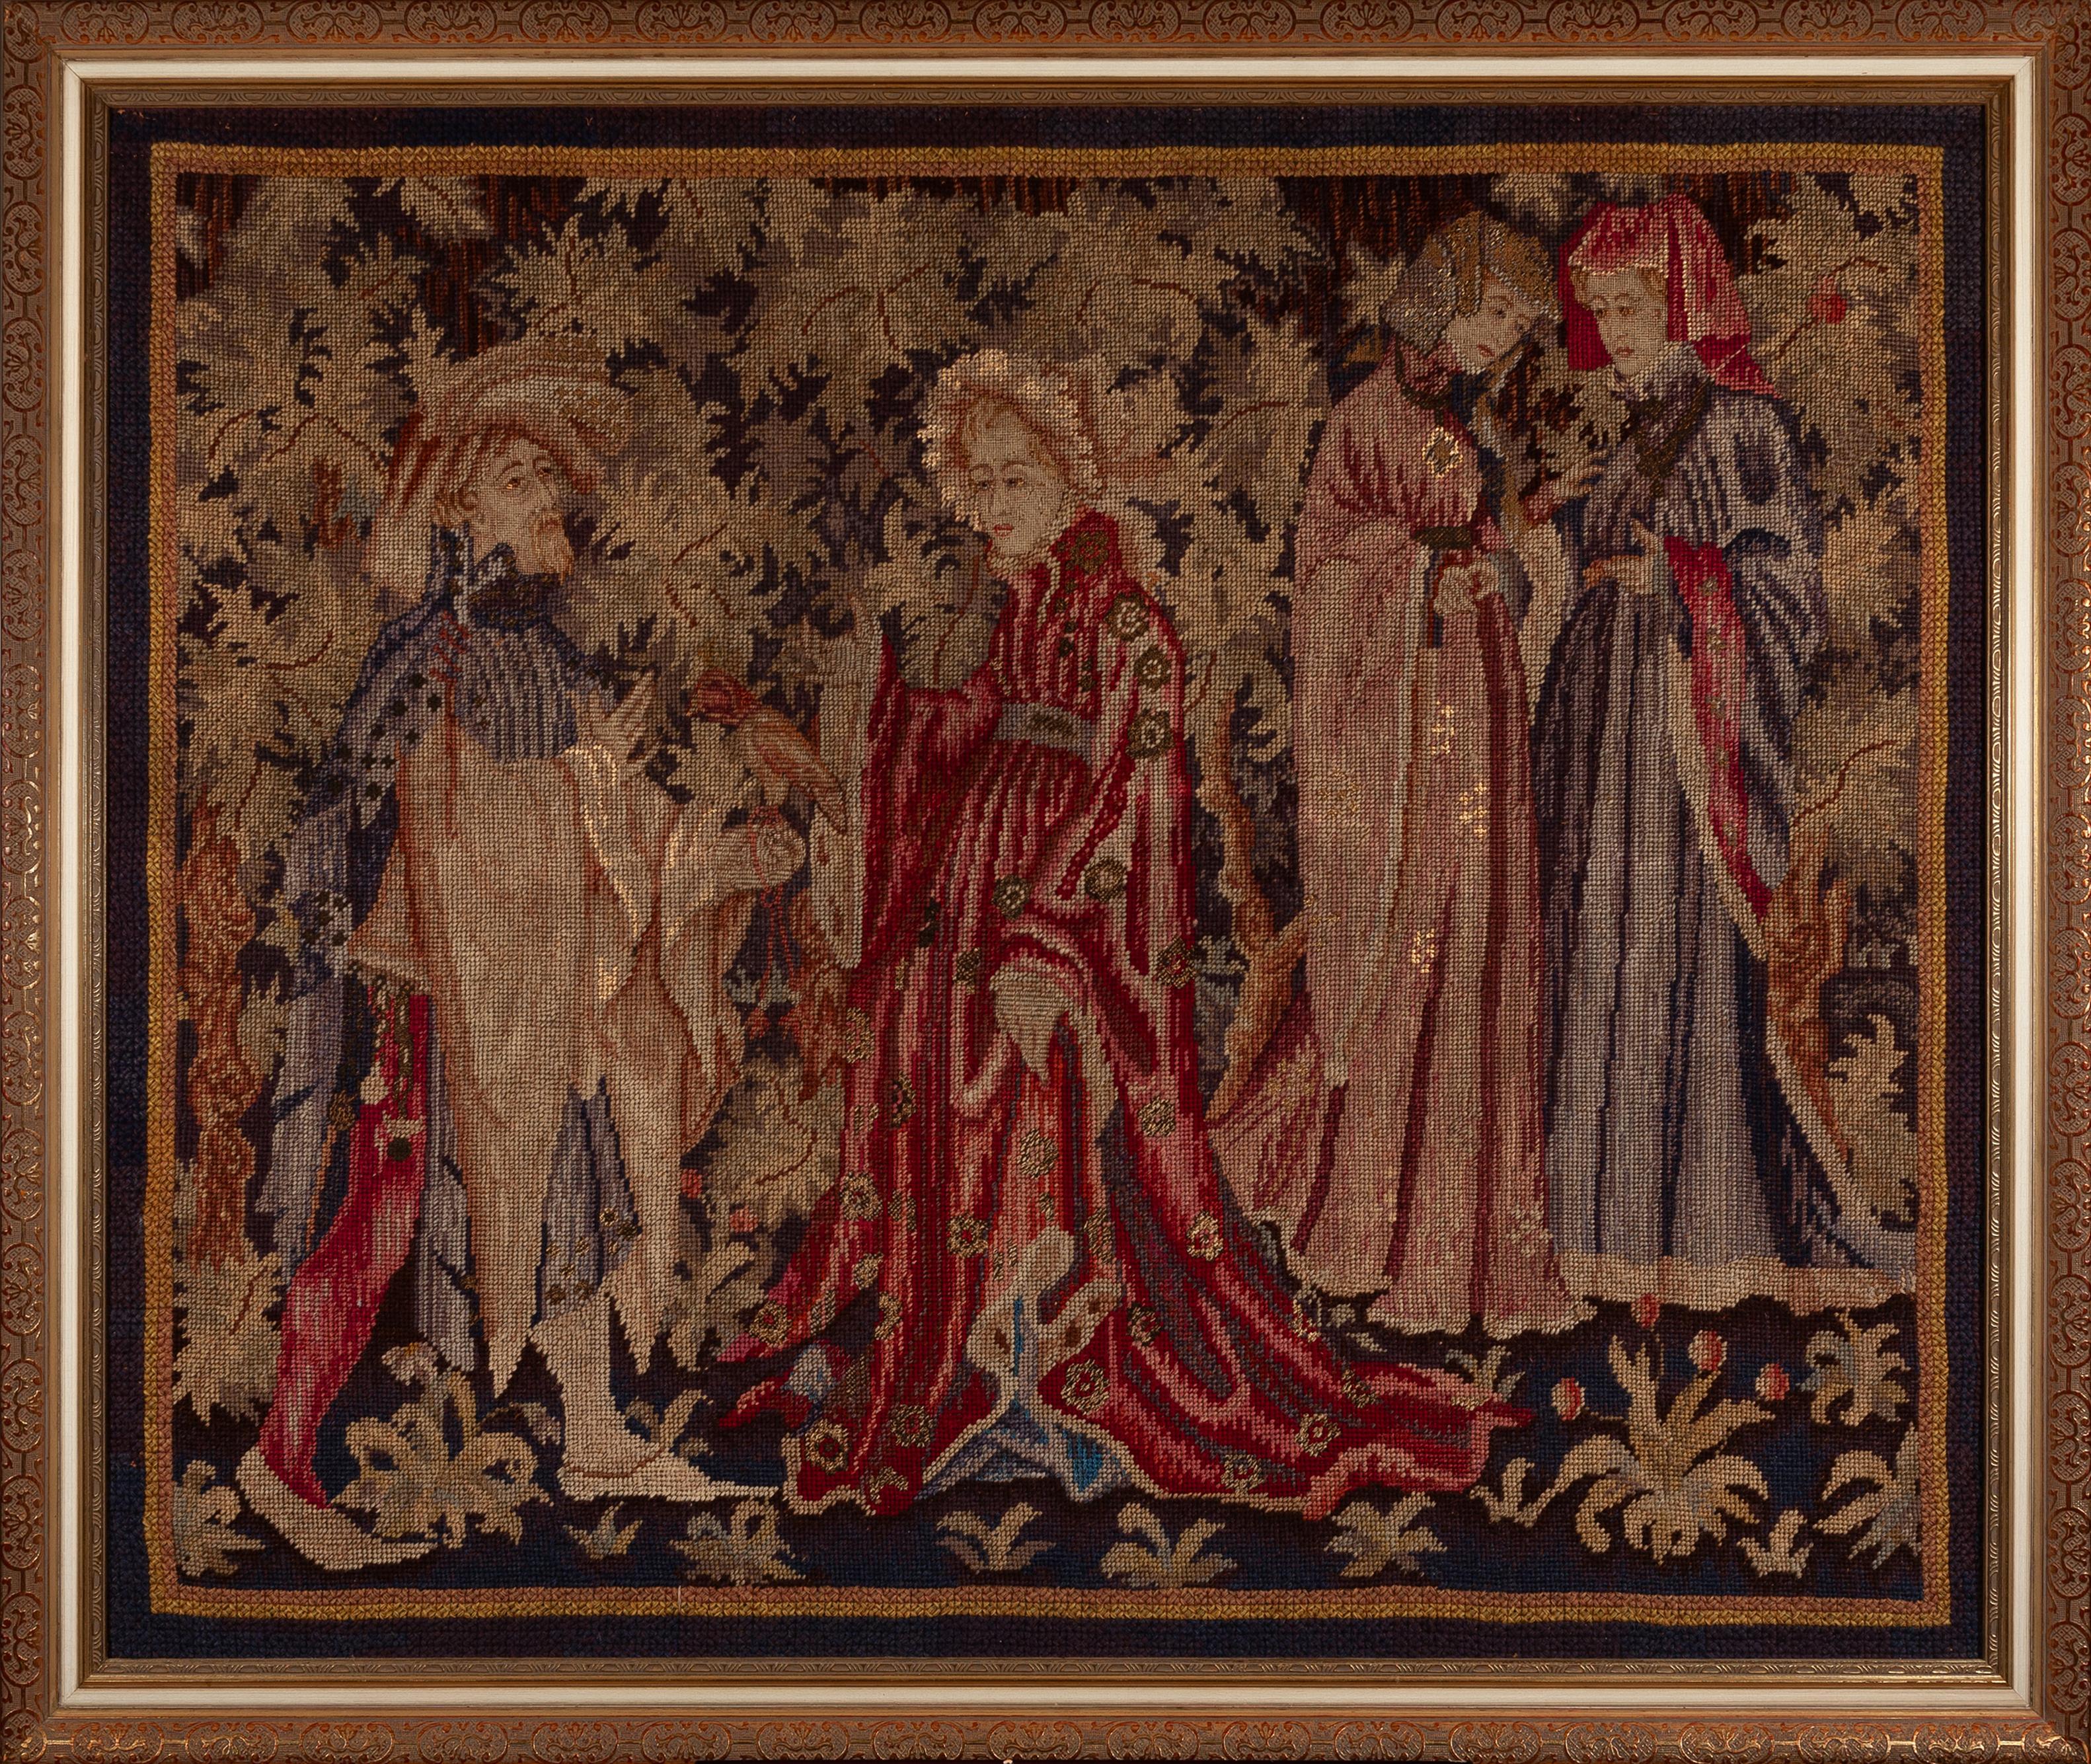 Untitled (Needlepoint Tapestry with Gold Thread Details  17th century Wool)